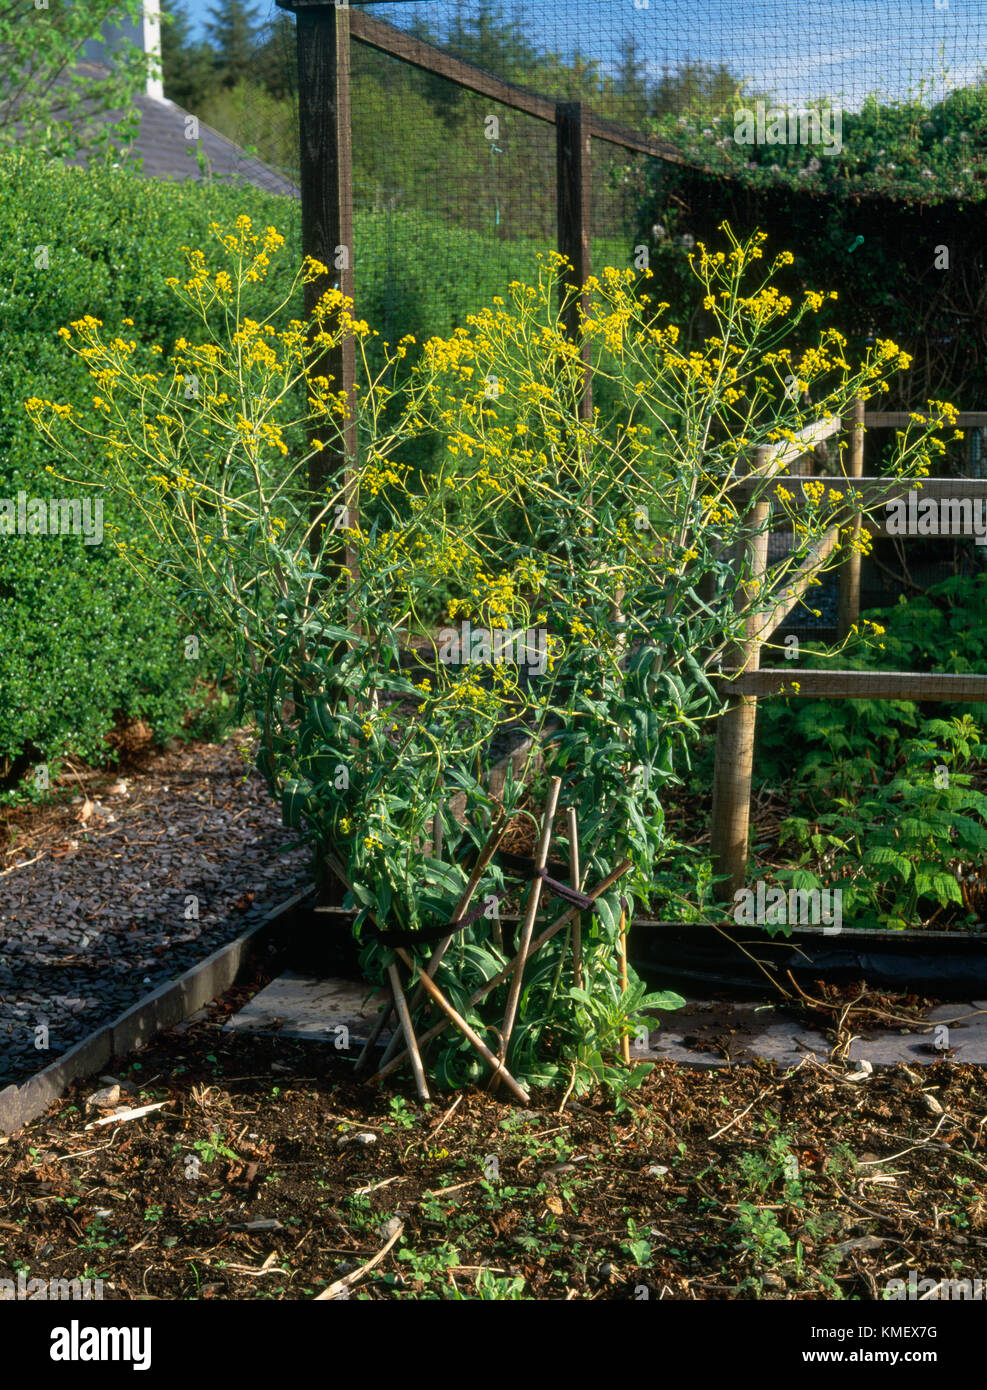 Isatis tinctoria, also called Dyer's Woad, in a domestic vegetable garden, North Wales. Biannual brassica plant, from which blue dye Woad is made. Stock Photo